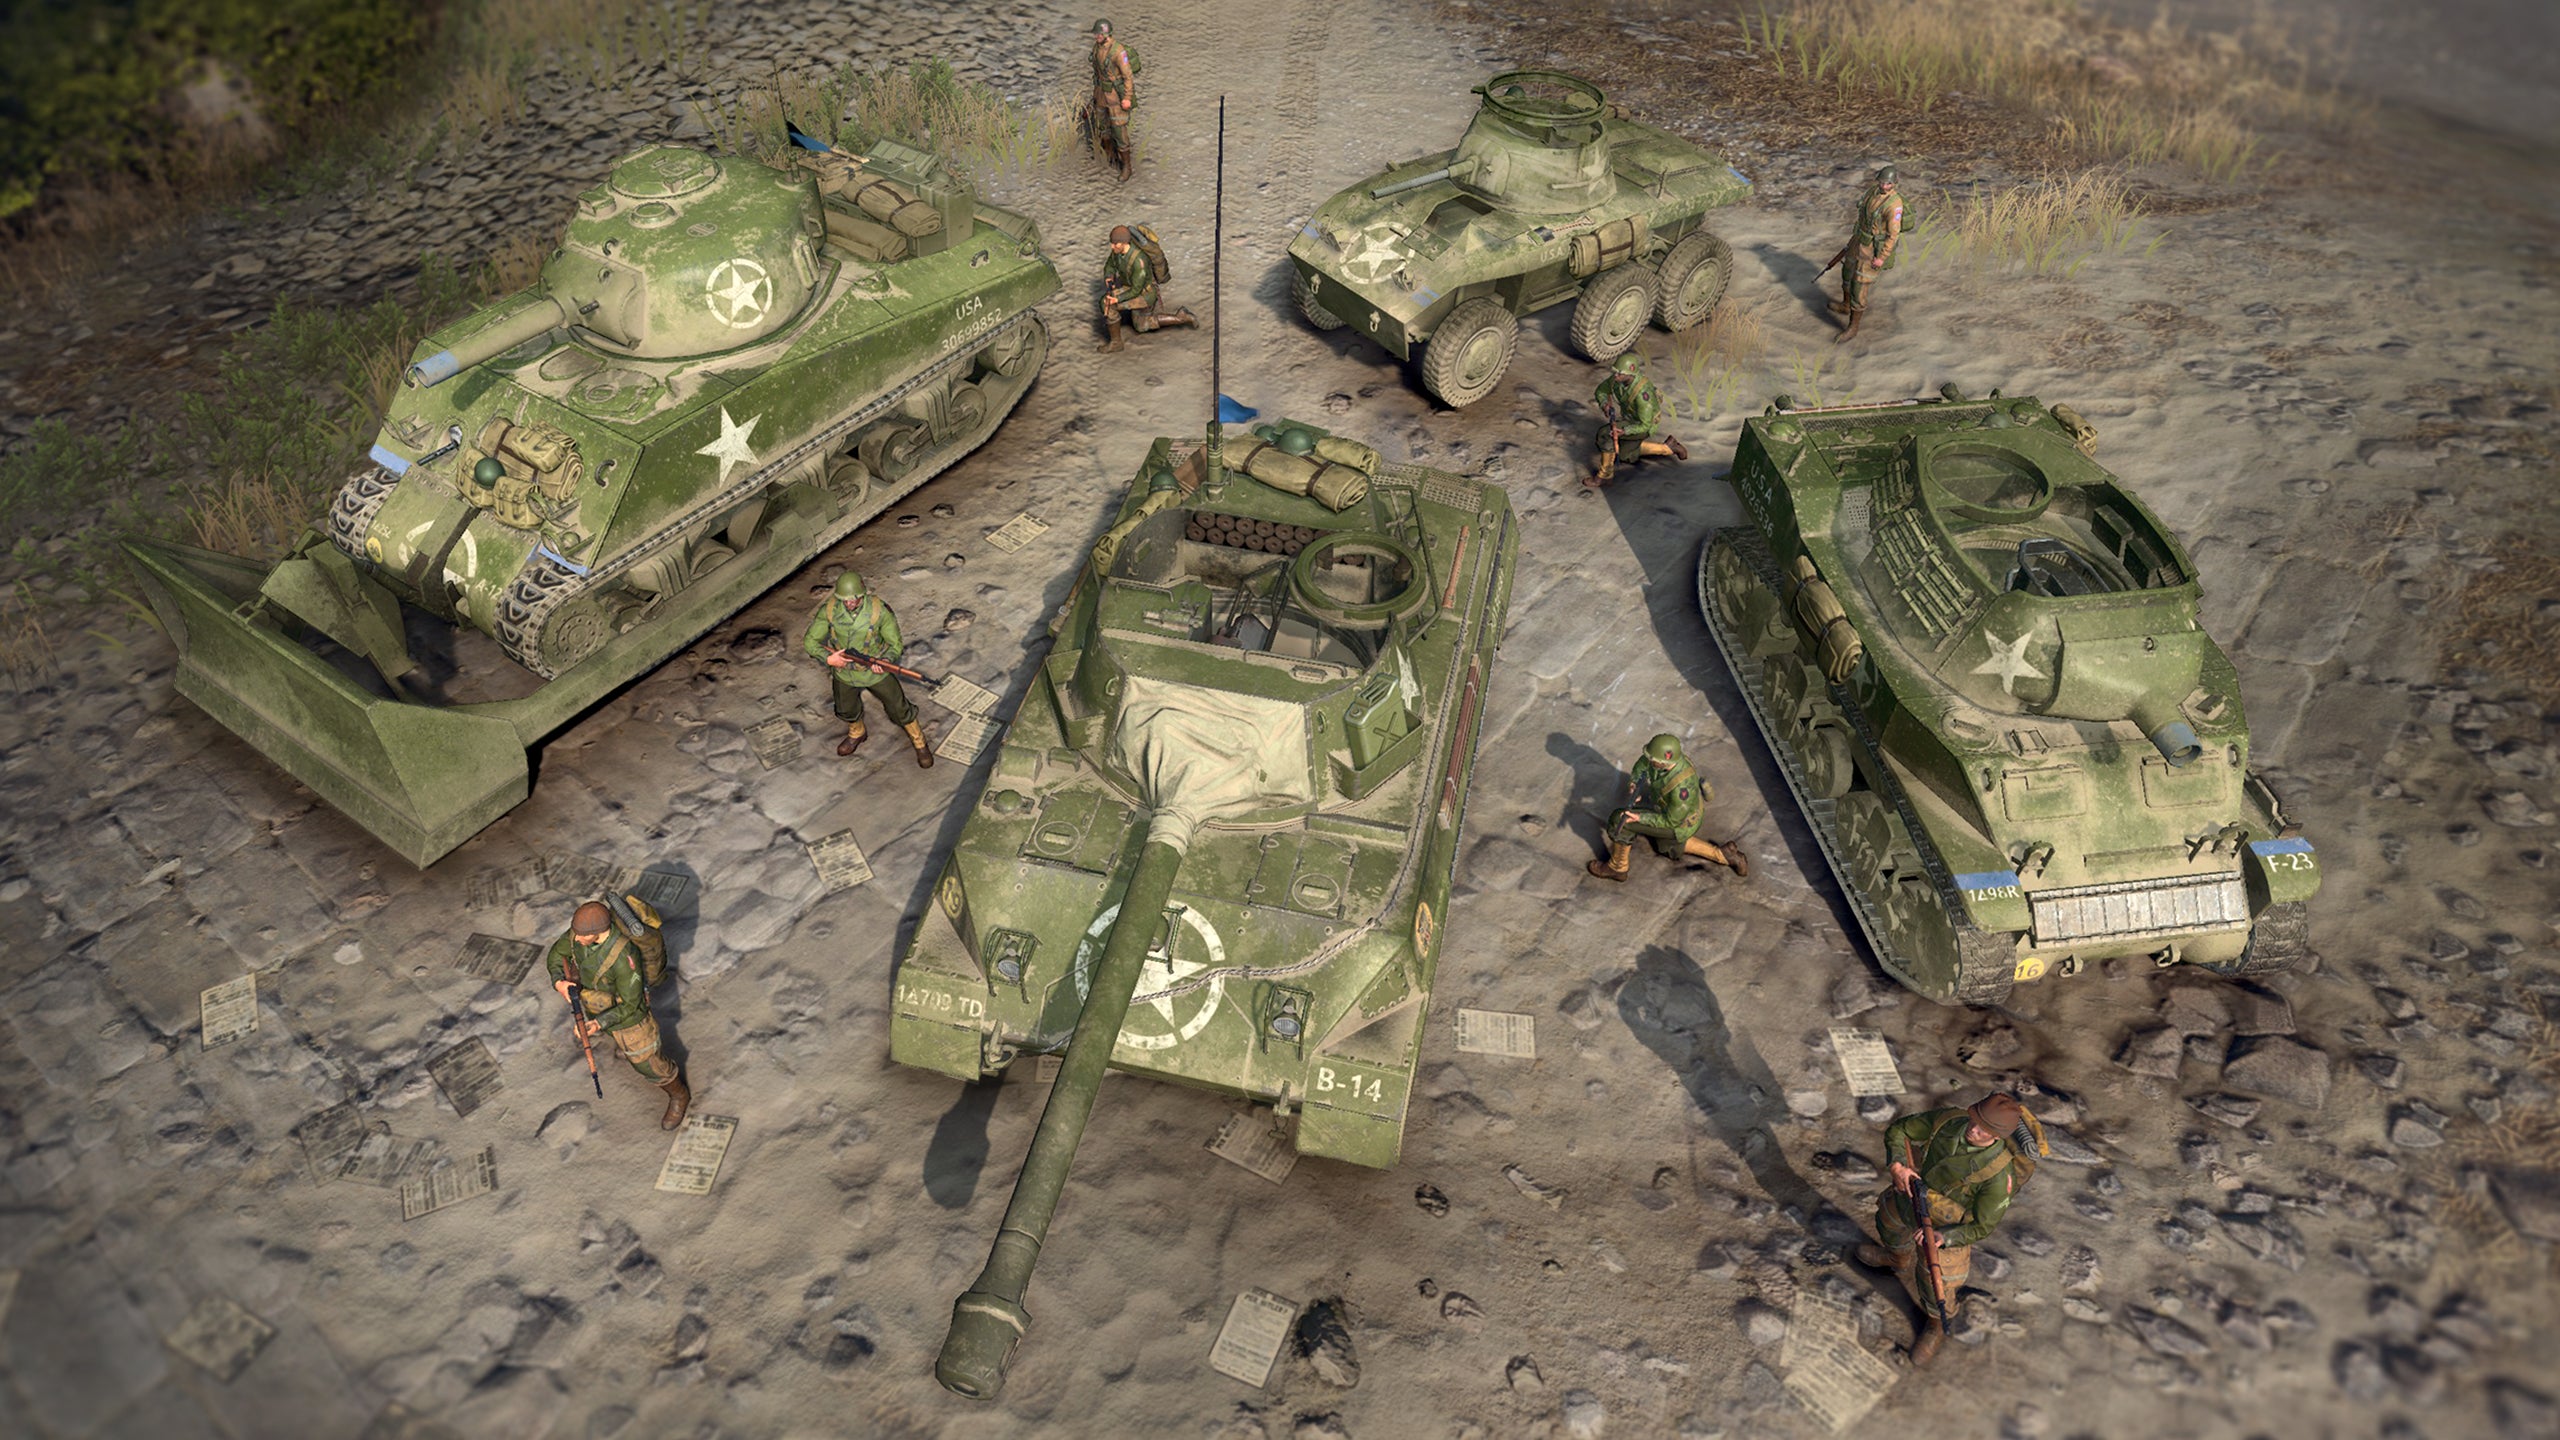 Company of Heroes 3 preview - a view of four Italian vehicles and infantry